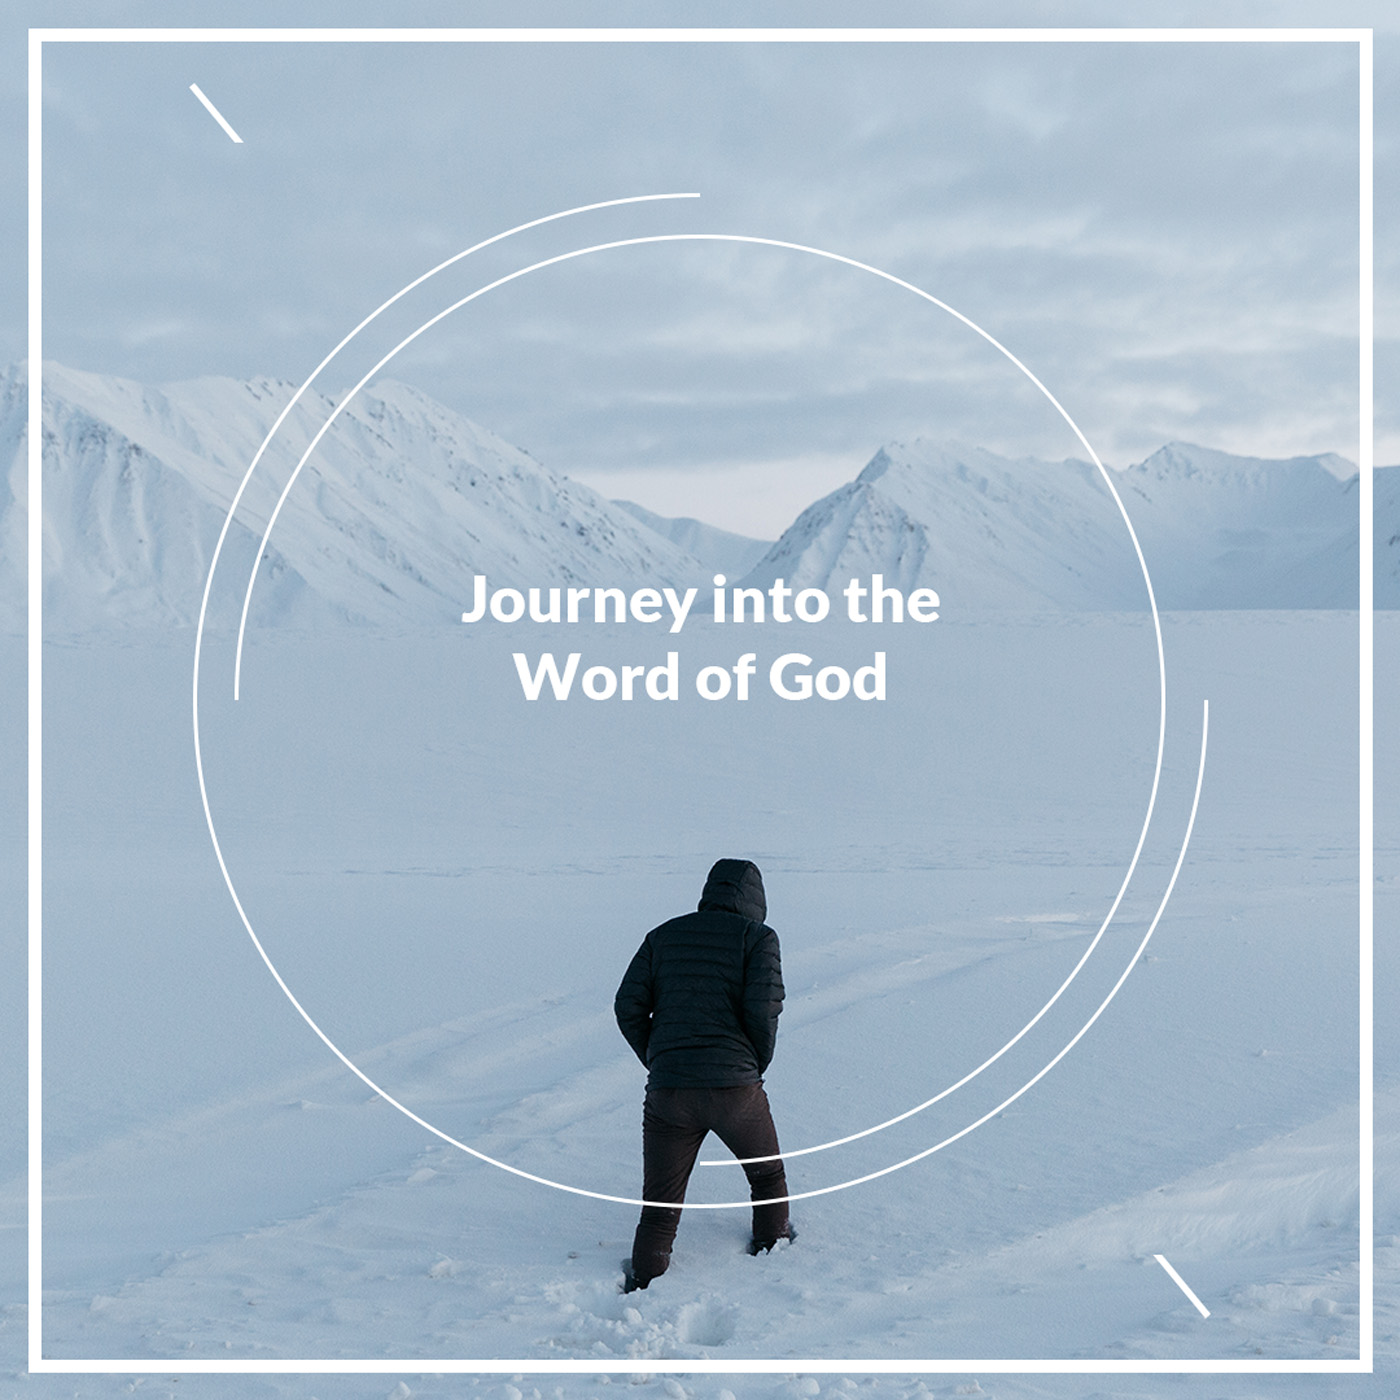 Journey into the Word of God - 01-29-2020